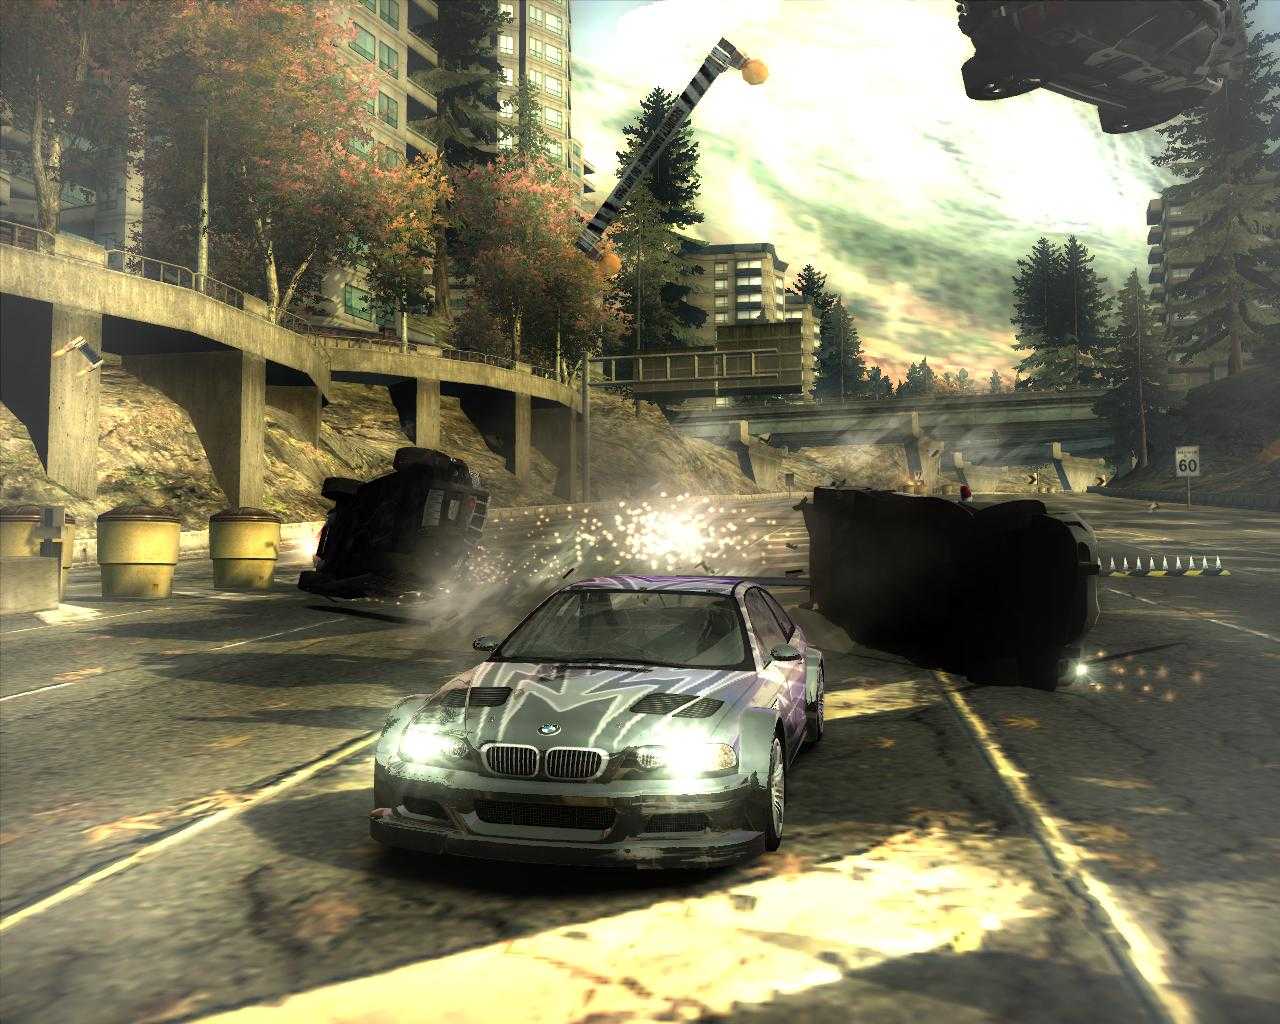 100 most wanted. Игра NFS most wanted 2005. Нфс мост вантед 2005. Гонки NFS most wanted 2005. NFS мост вантед 2005.